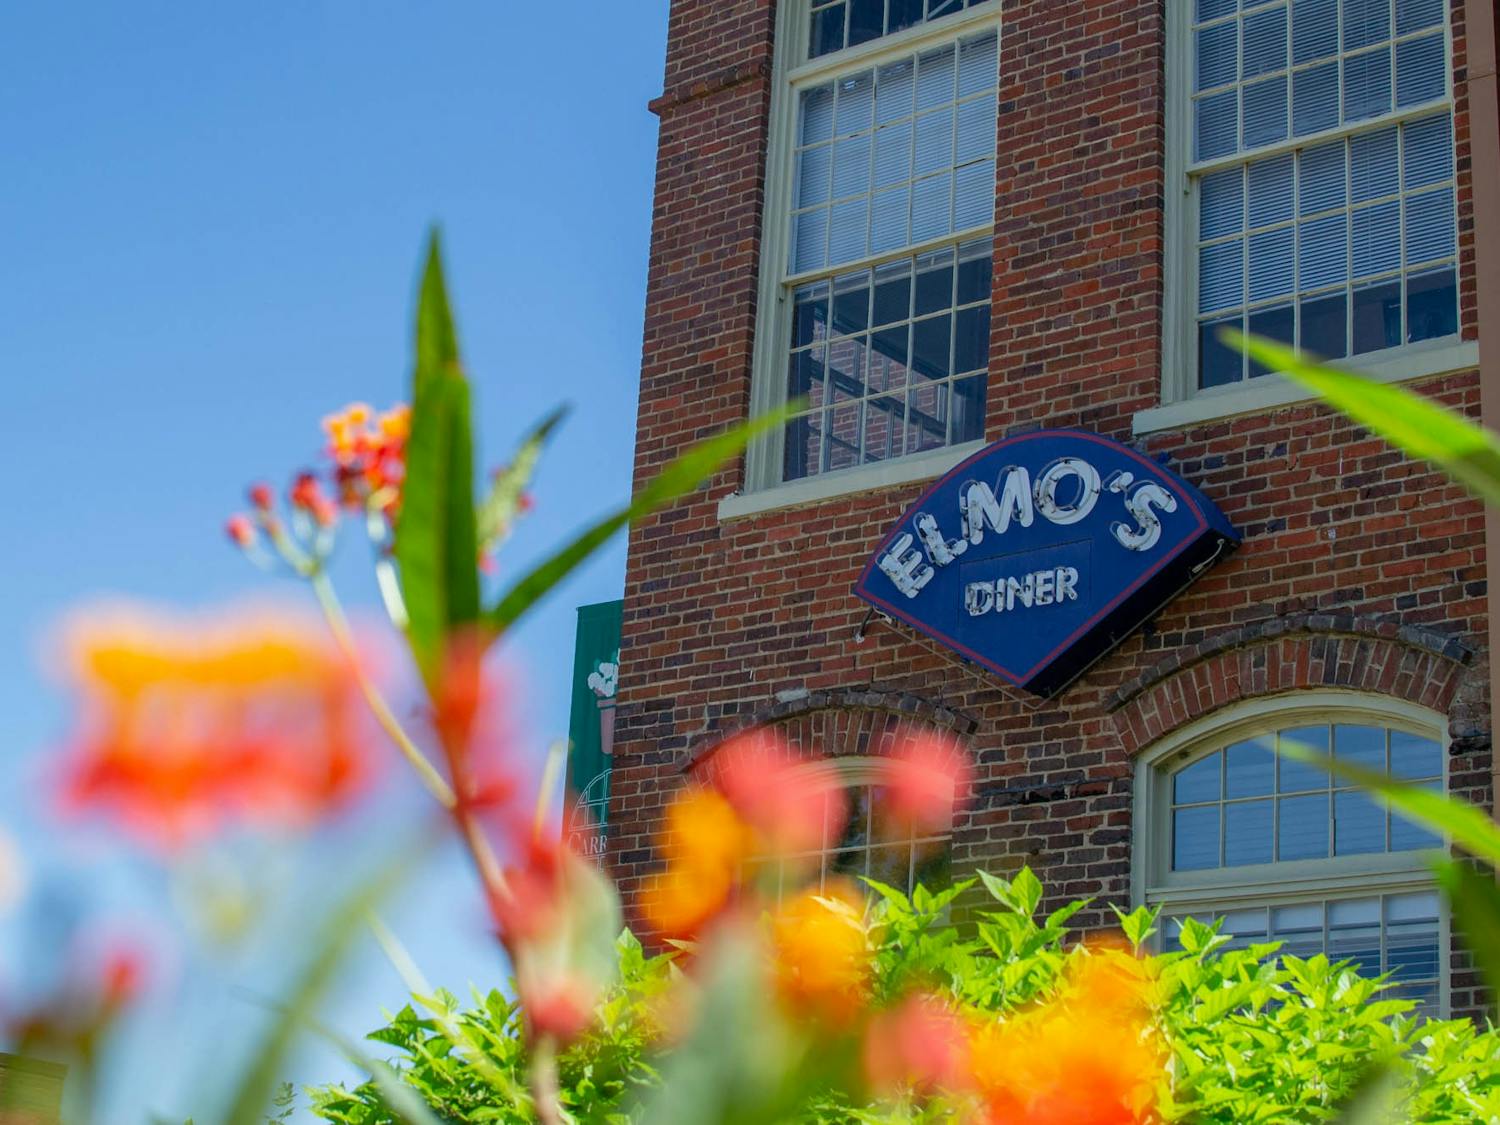 Elmo's Diner, pictured here on Sunday, Sept. 20, 2020, announced on Friday, Sept. 18, along with City Kitchen Restaurant, that it would be permanently closing due to the financial hardships the COVID-19 pandemic brought.